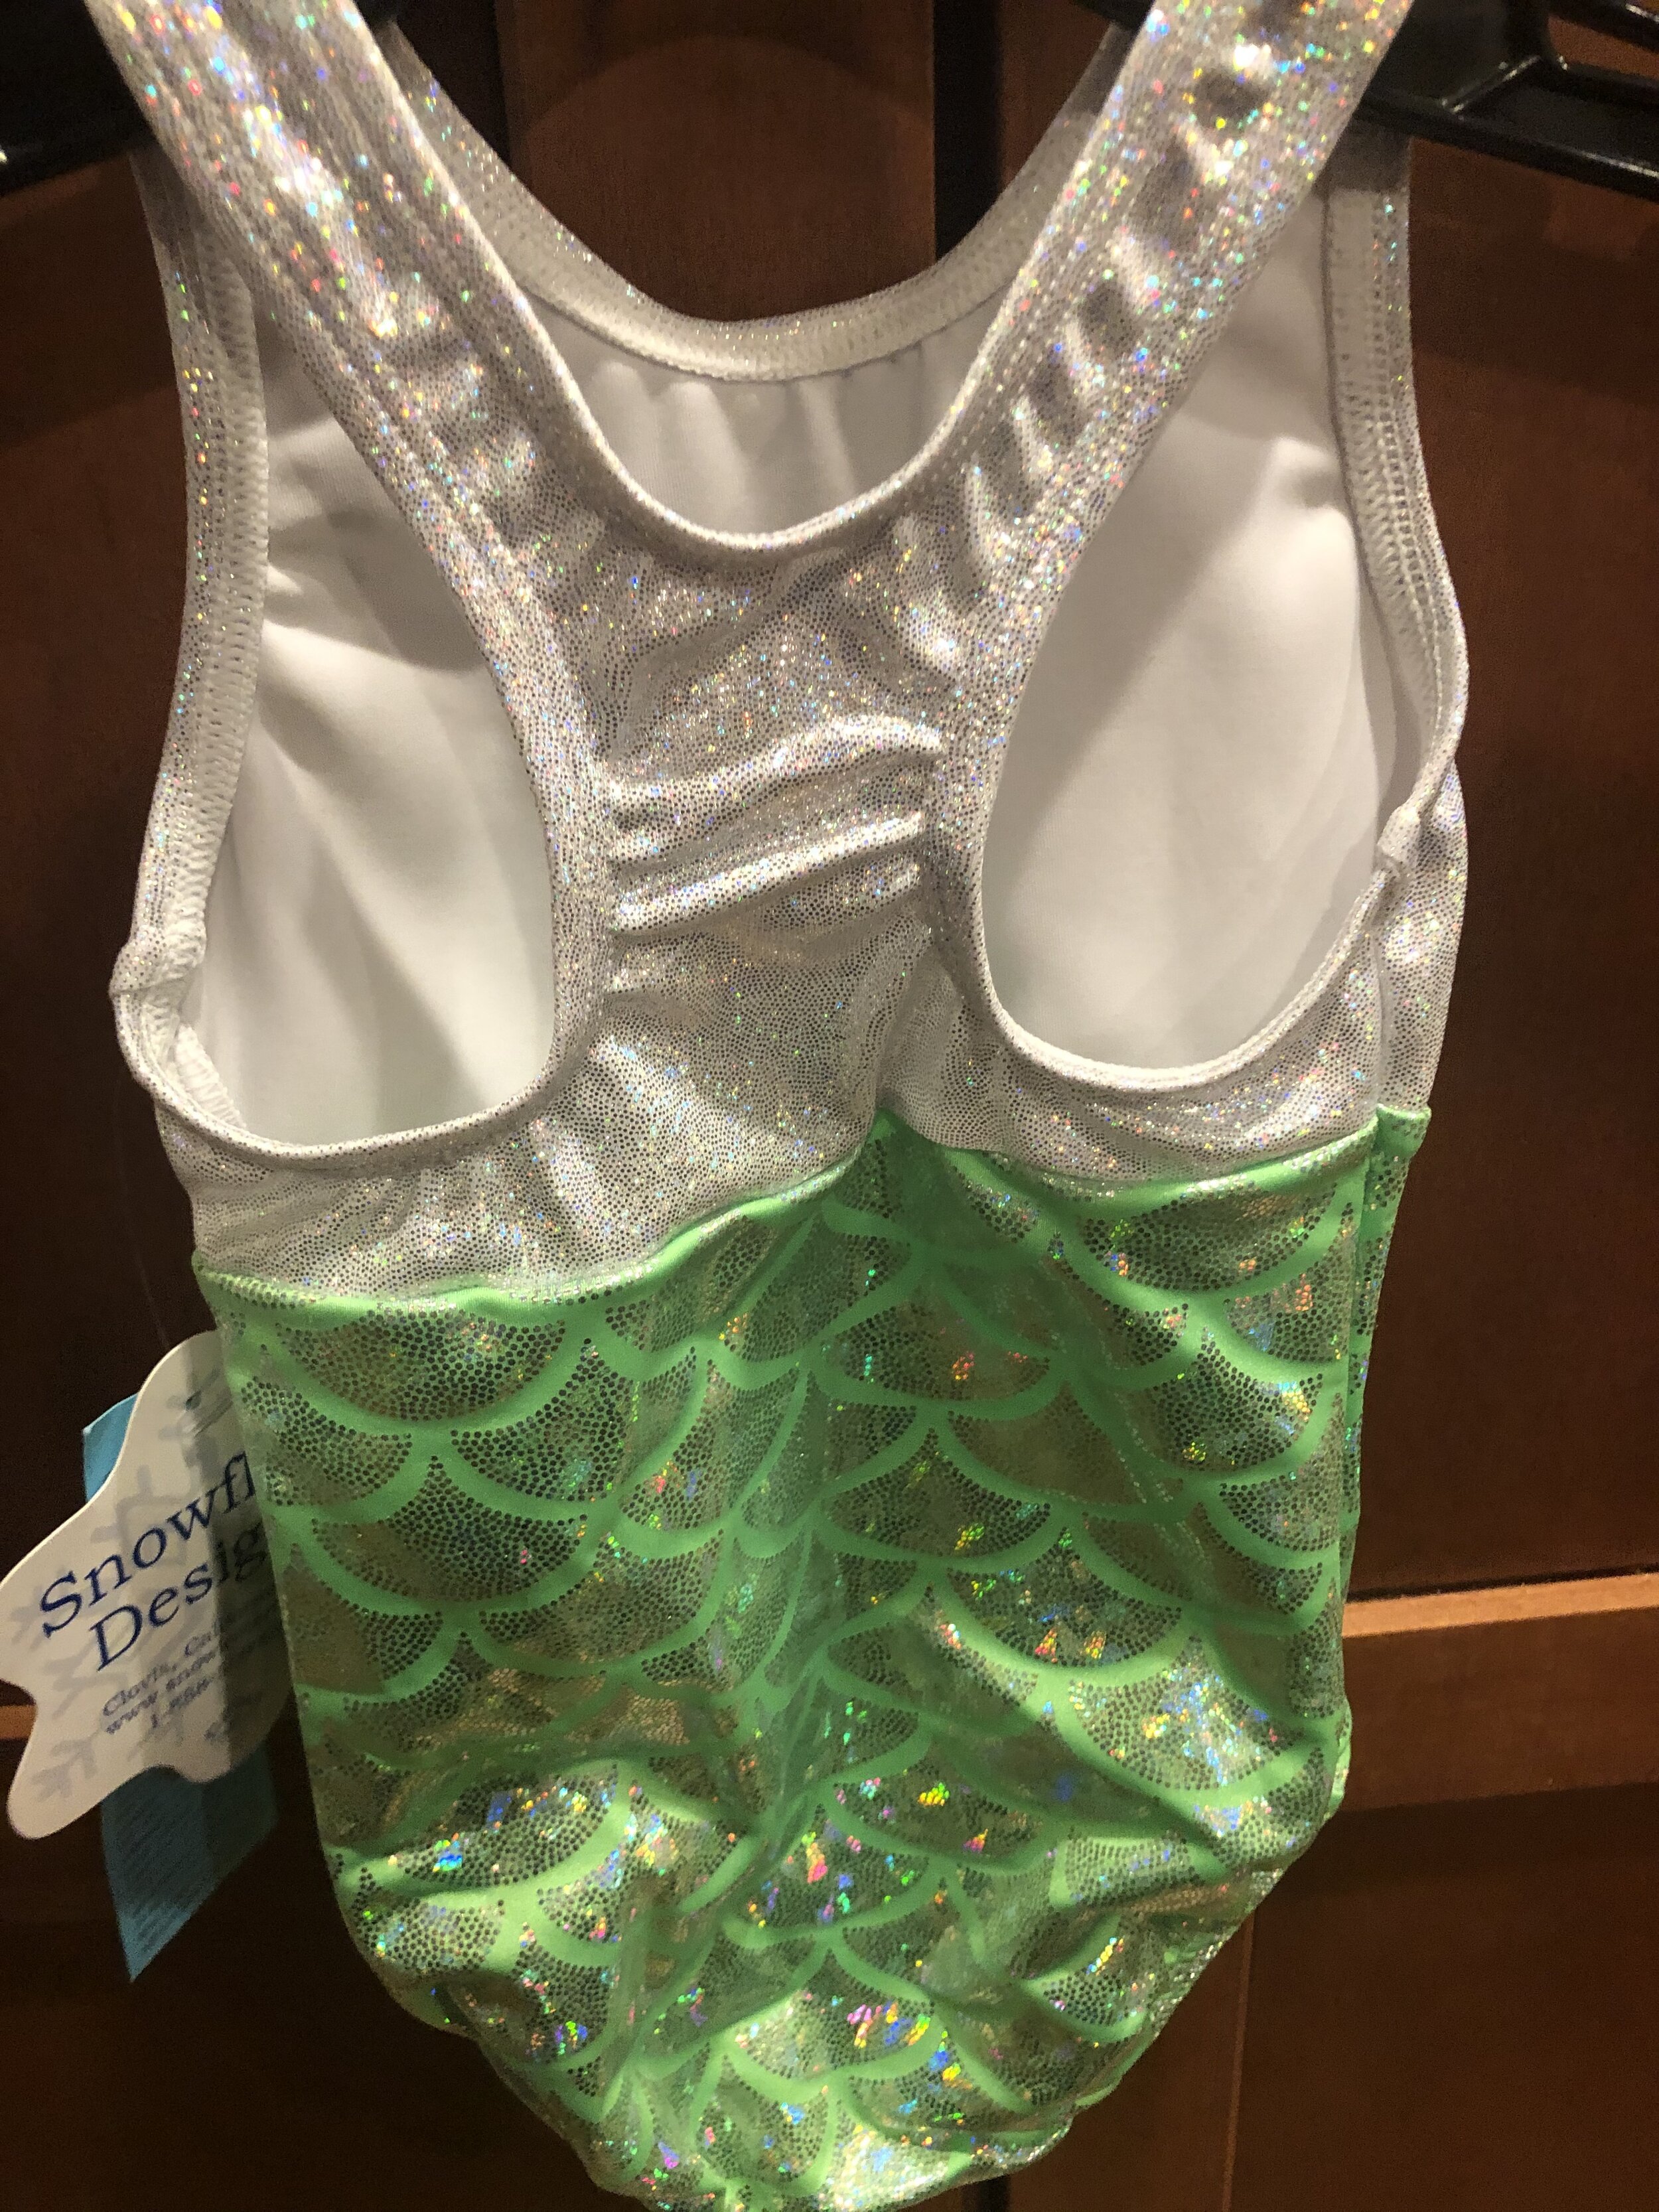 NEW $29.99 Adult Extra Small Gymnastics or Dance Leotard by Snowflake Designs 